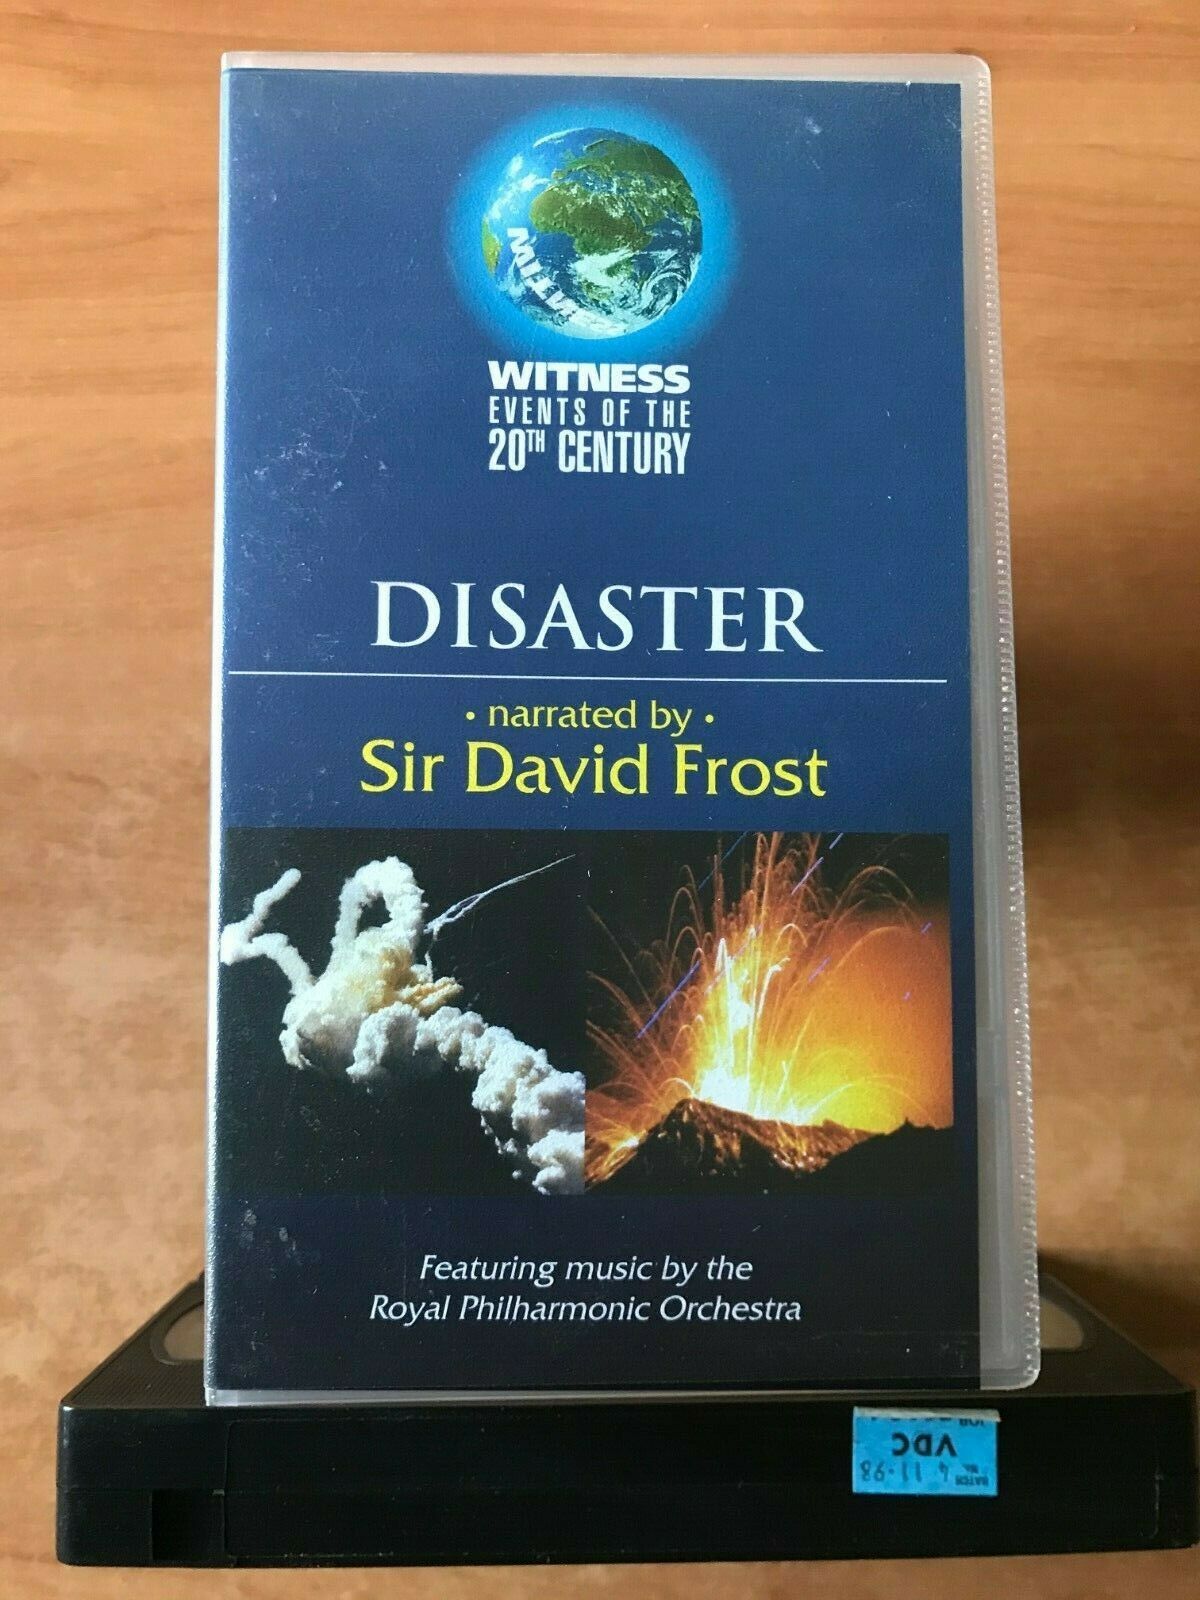 Disaster: Nature's Revenge [Sir David Frost]: Earthquakes - Chernobyl - Pal VHS